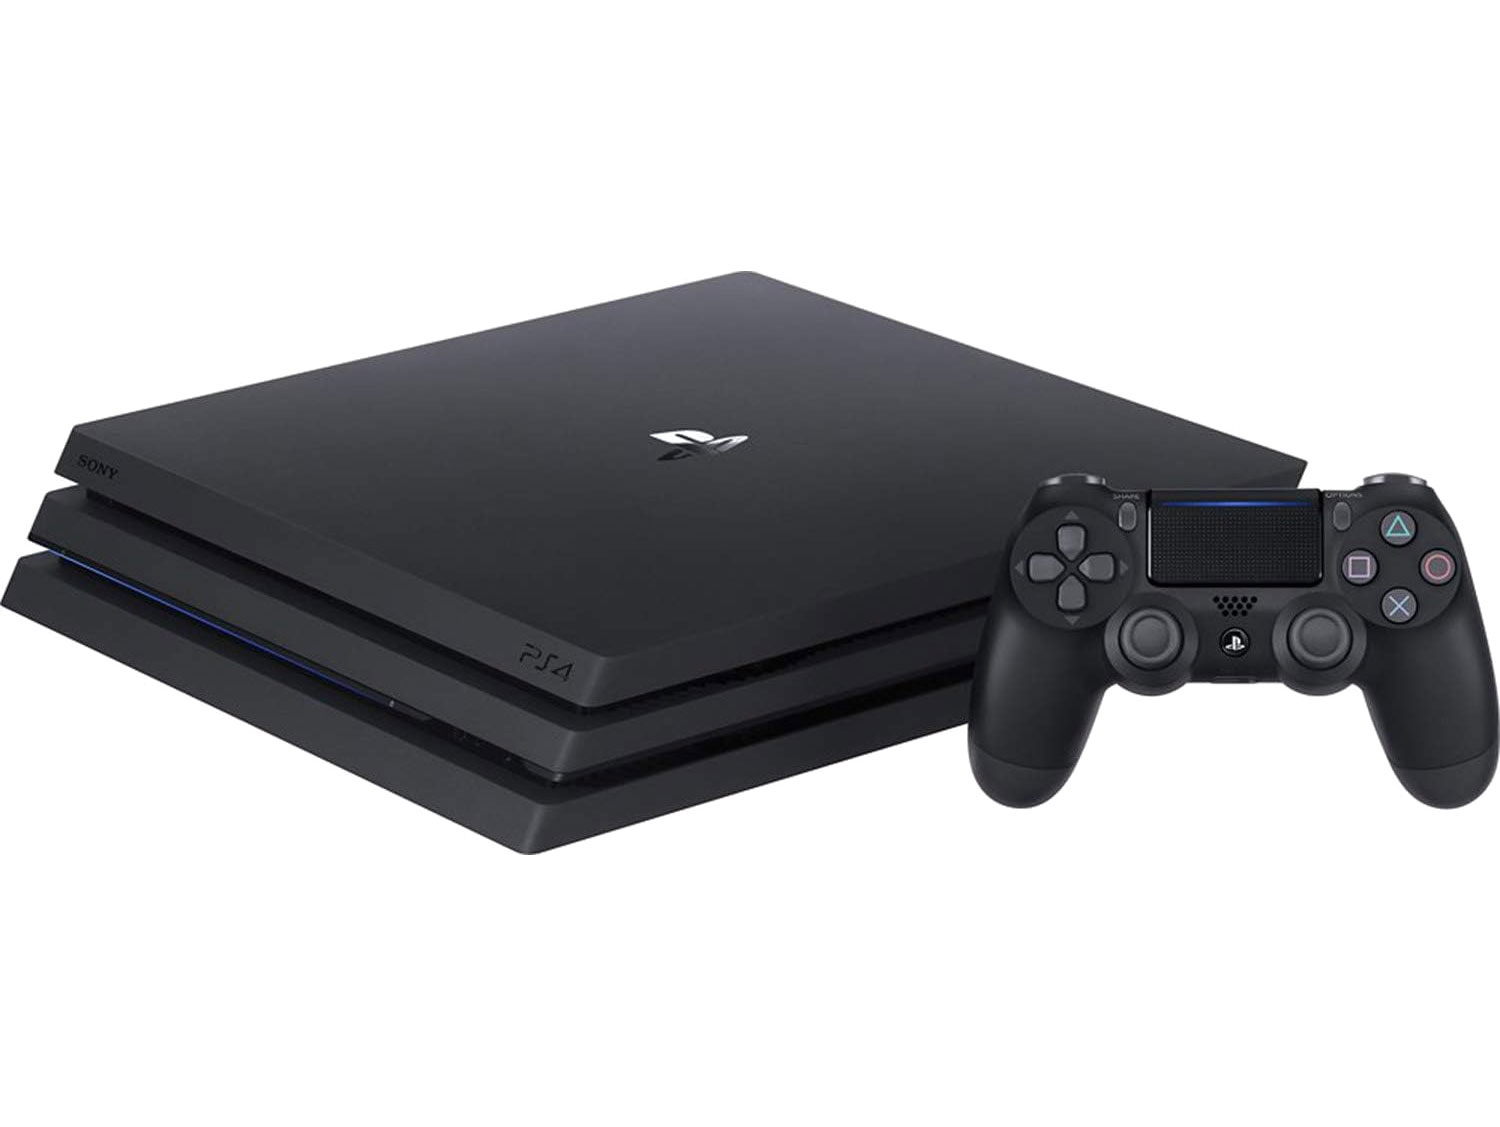 Variety of PS4 Pro games available for rental